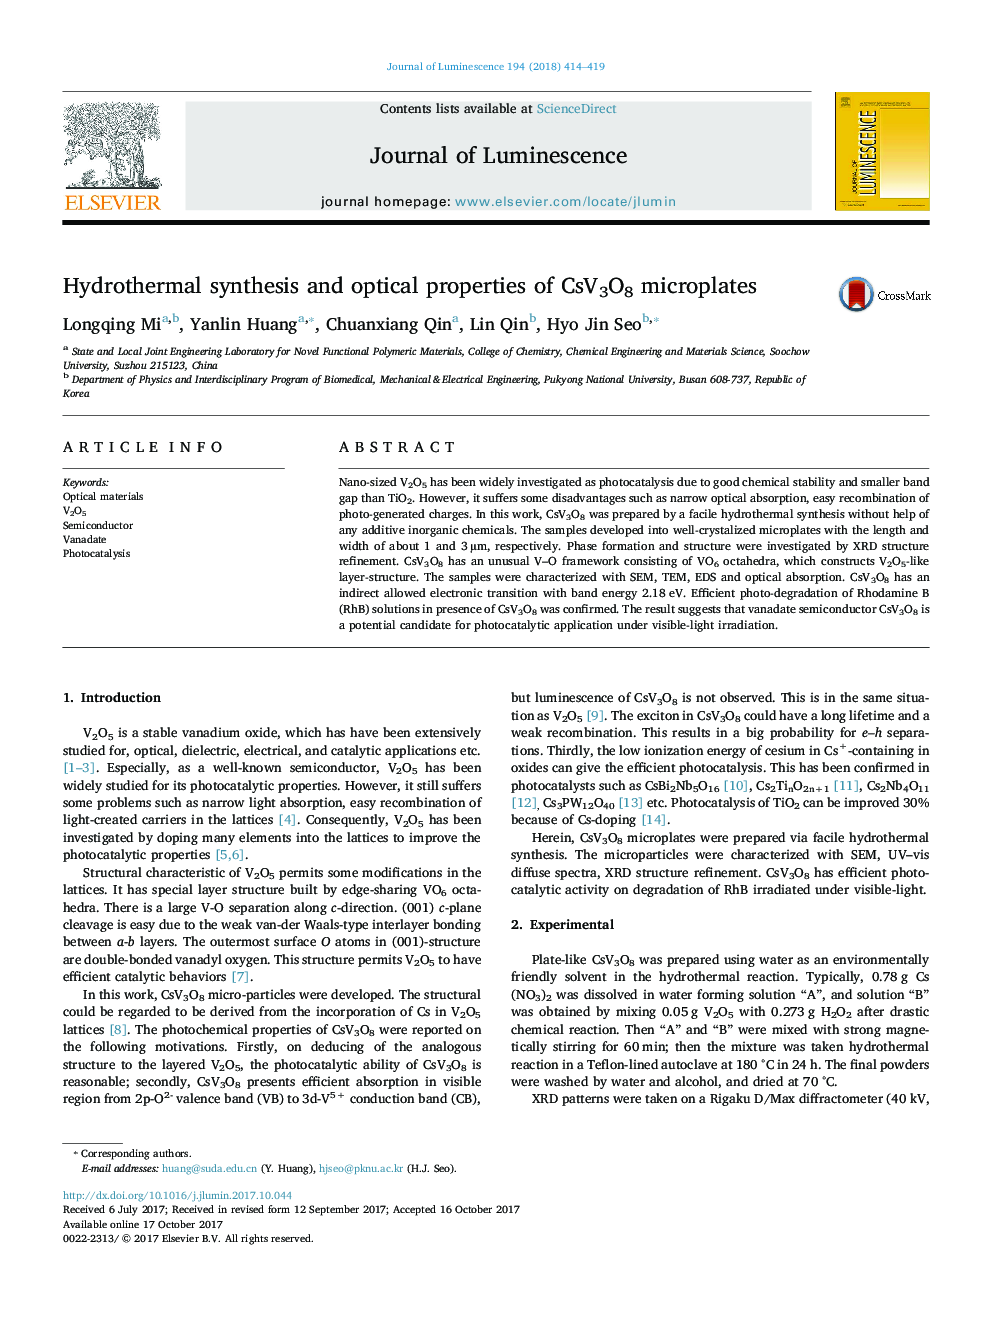 Hydrothermal synthesis and optical properties of CsV3O8 microplates